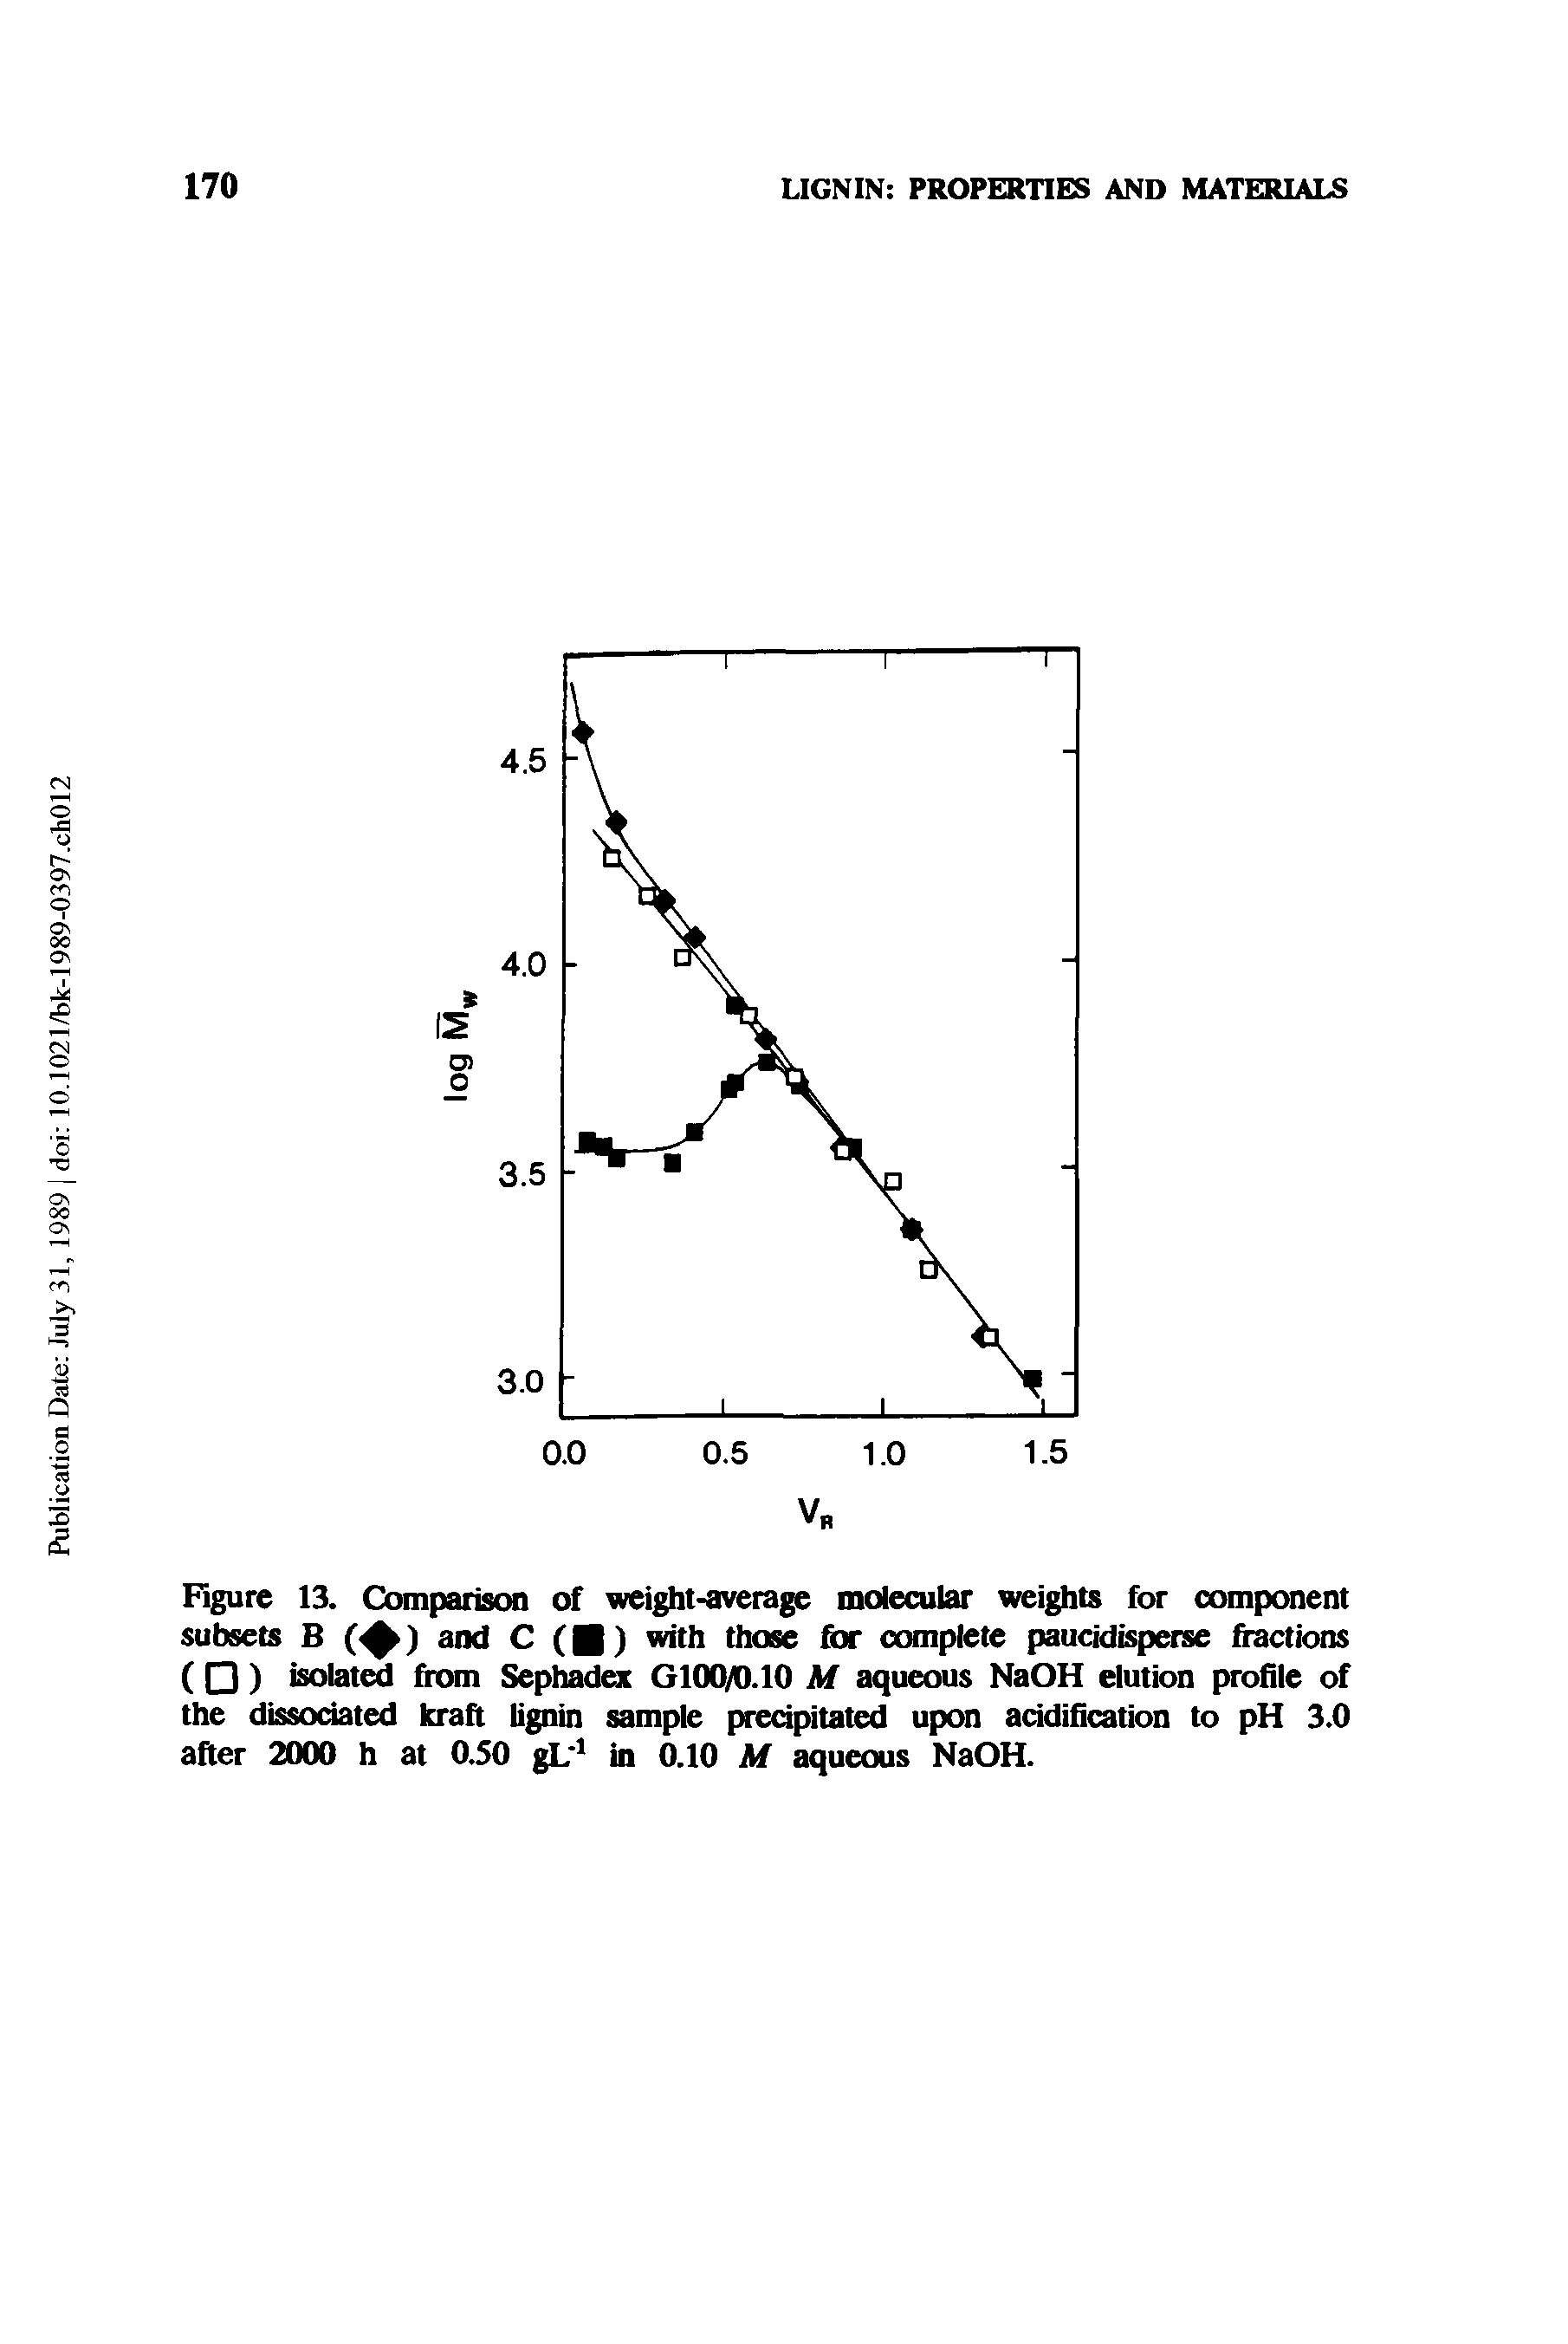 Figure 13. Comparison of weight-average molecular weights for component subsets B ( ) and C ( ) with those for complete paucidisperse fractions ( 0) isolated from Sephadex G100/0.10 M aqueous NaOH elution profile of the dissociated kraft lignin sample precipitated upon acidification to pH 3.0 after 2000 h at 0.50 gL 1 in 0.10 M aqueous NaOH.